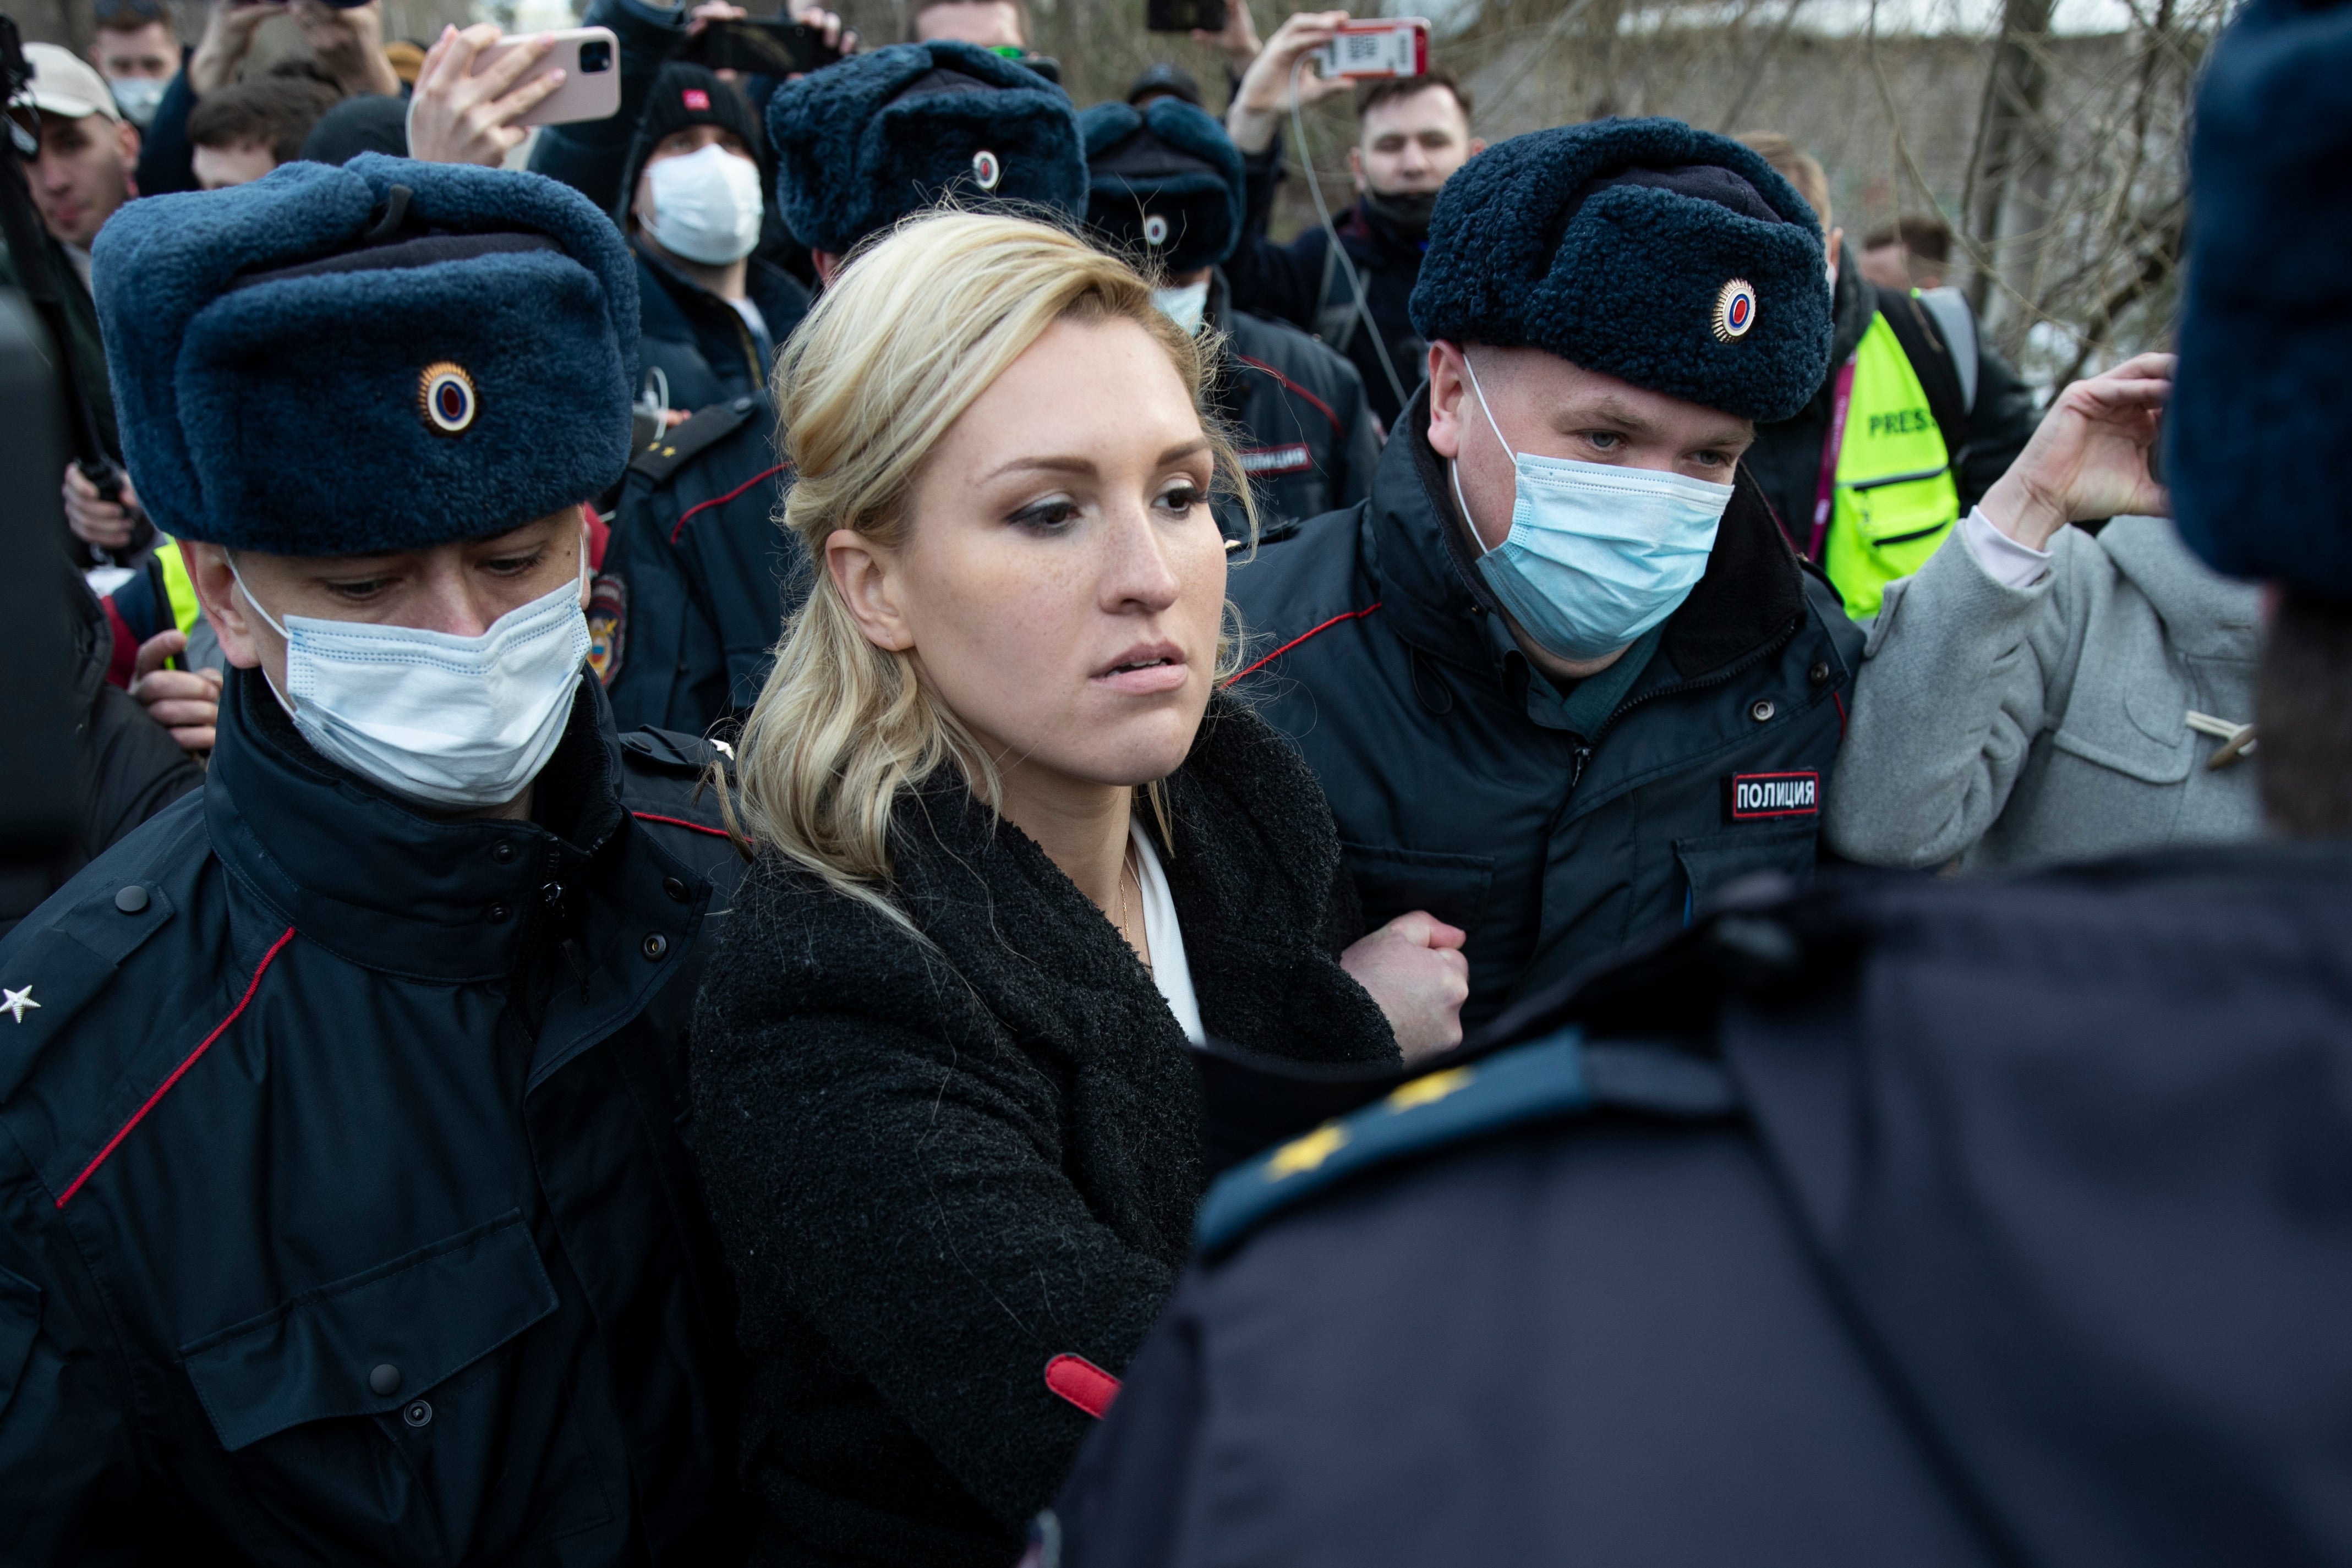 Police officers detain the Alliance of Doctors union’s leader, Anastasia Vasilyeva, at the prison colony IK-2 where Alexei Navalny is being held